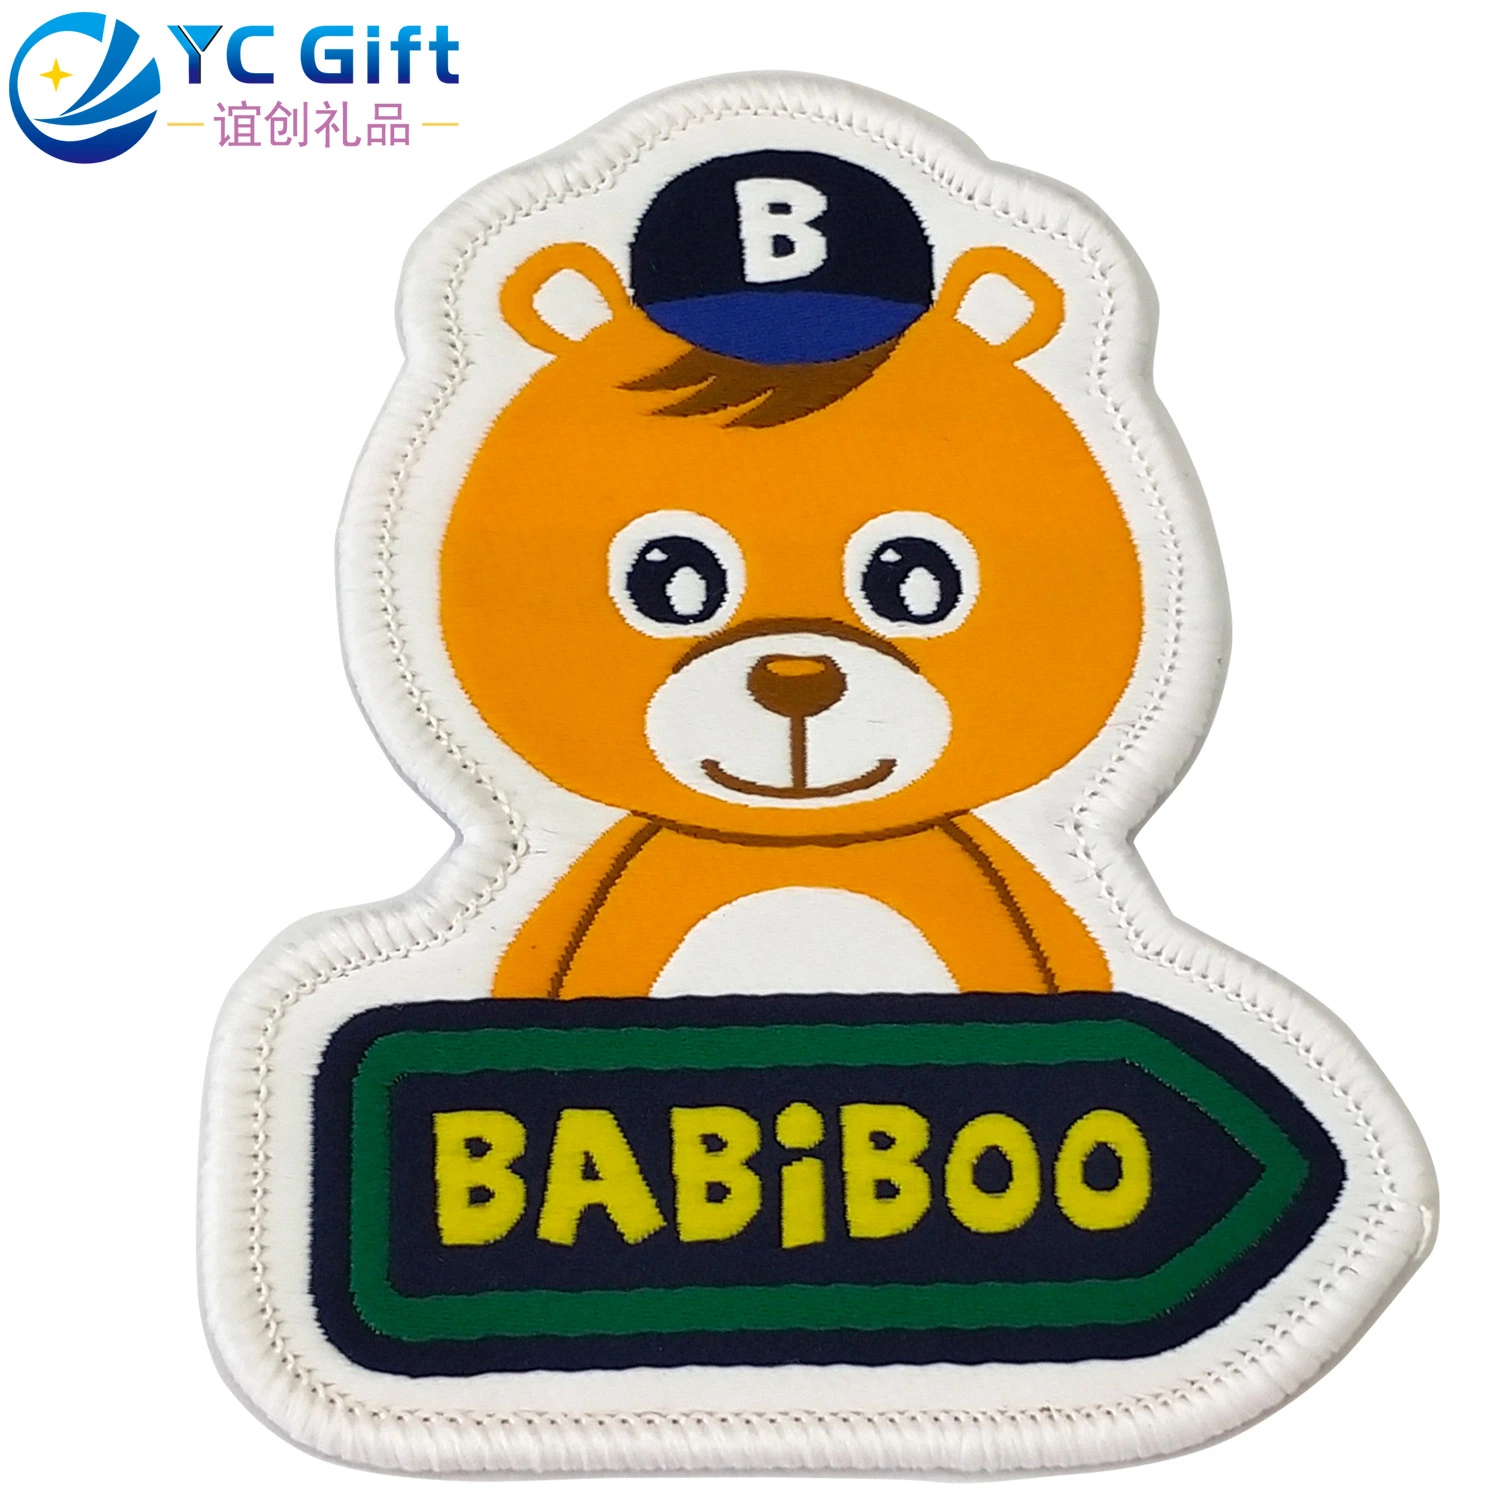 Wholesale Custom Cartoon Bear Heat Transfer Iron on Garment Accessories Patches Supplies Eco-Friendly Embroidery Shoes Denim Clothing Label in China